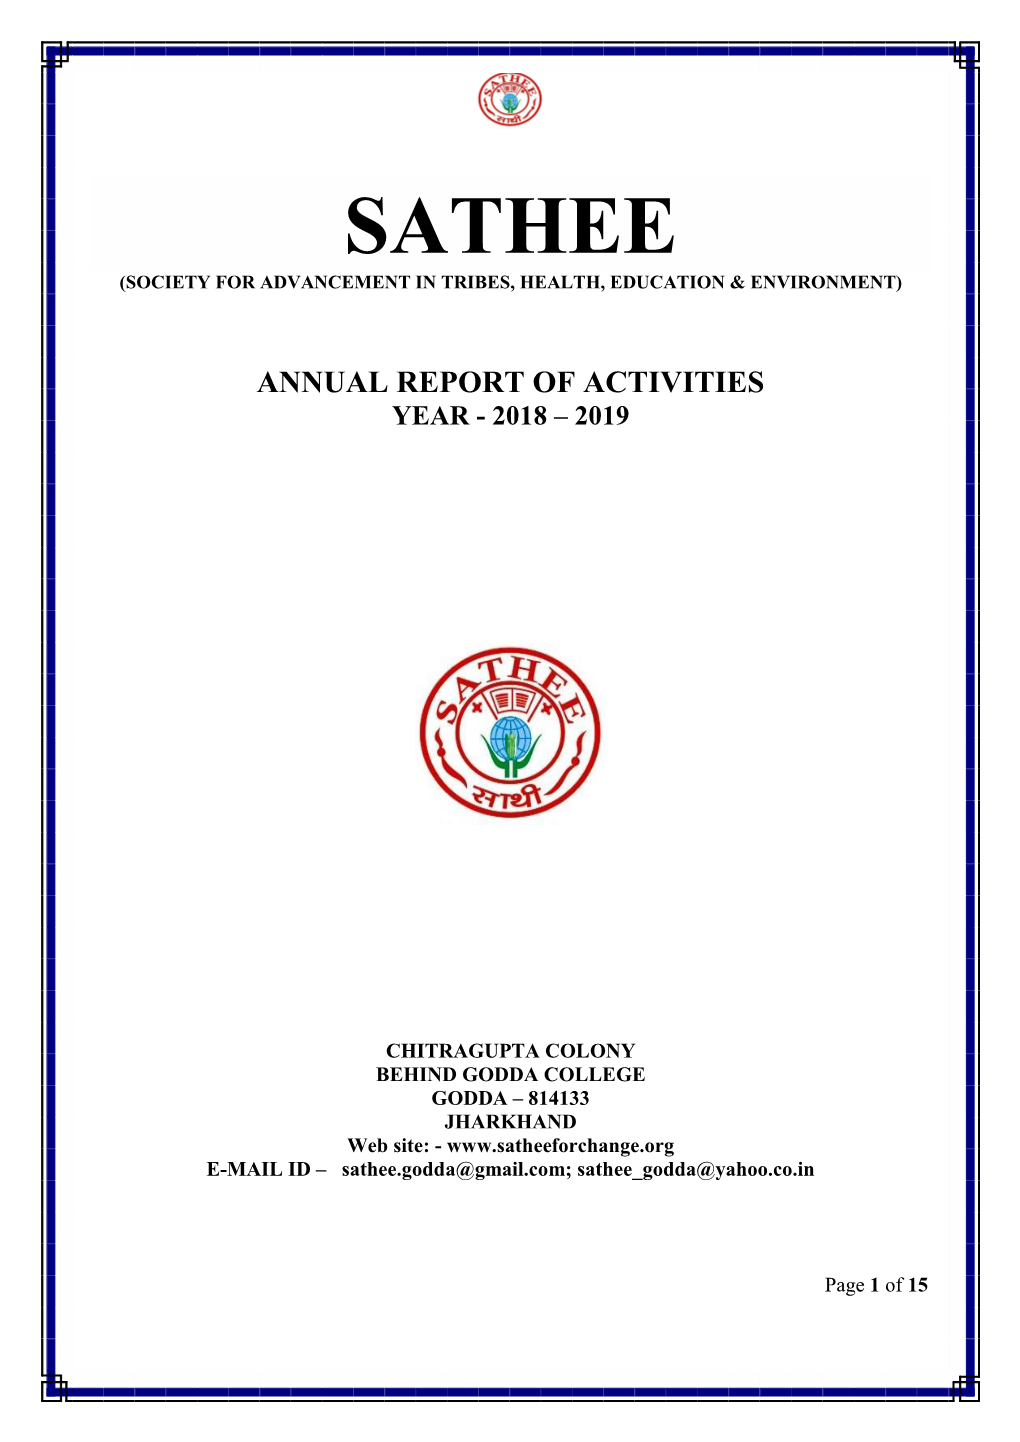 Sathee (Society for Advancement in Tribes, Health, Education & Environment)